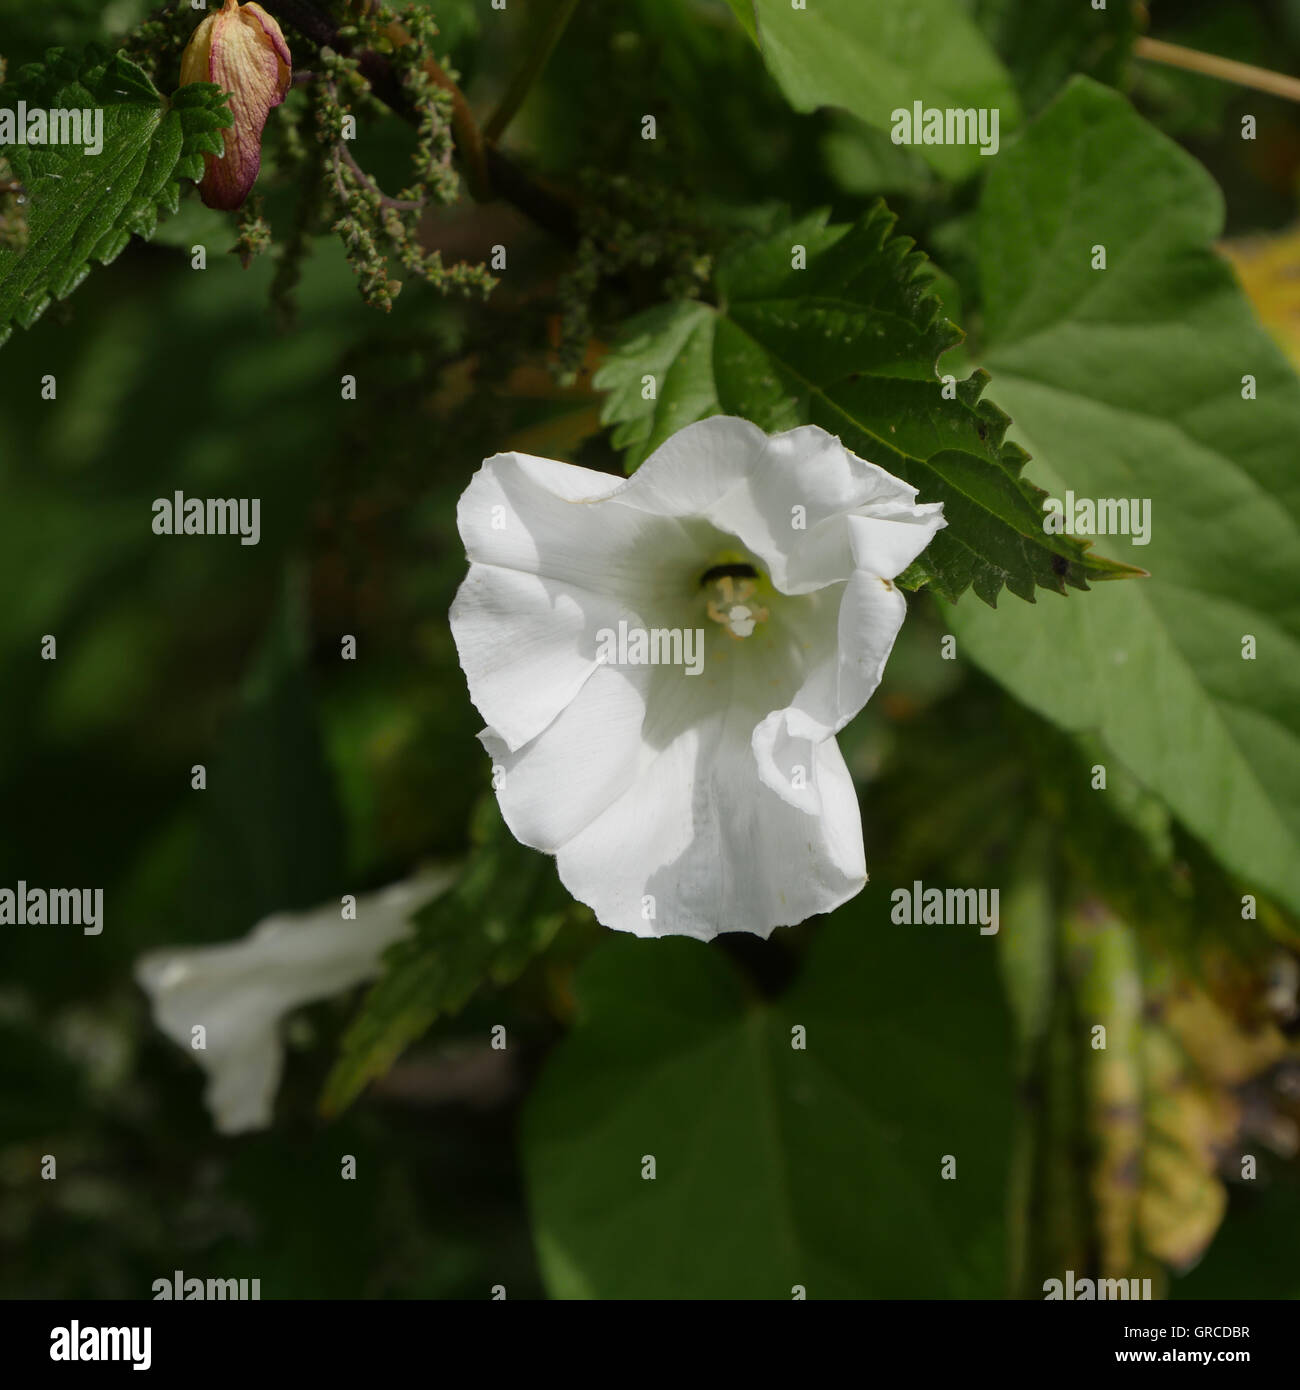 Bindweed, Calystegia Sepium, Great White, Funnel-Shaped Flowers With A Diameter Of Up To 5 Cm, Medicinal Plant Stock Photo